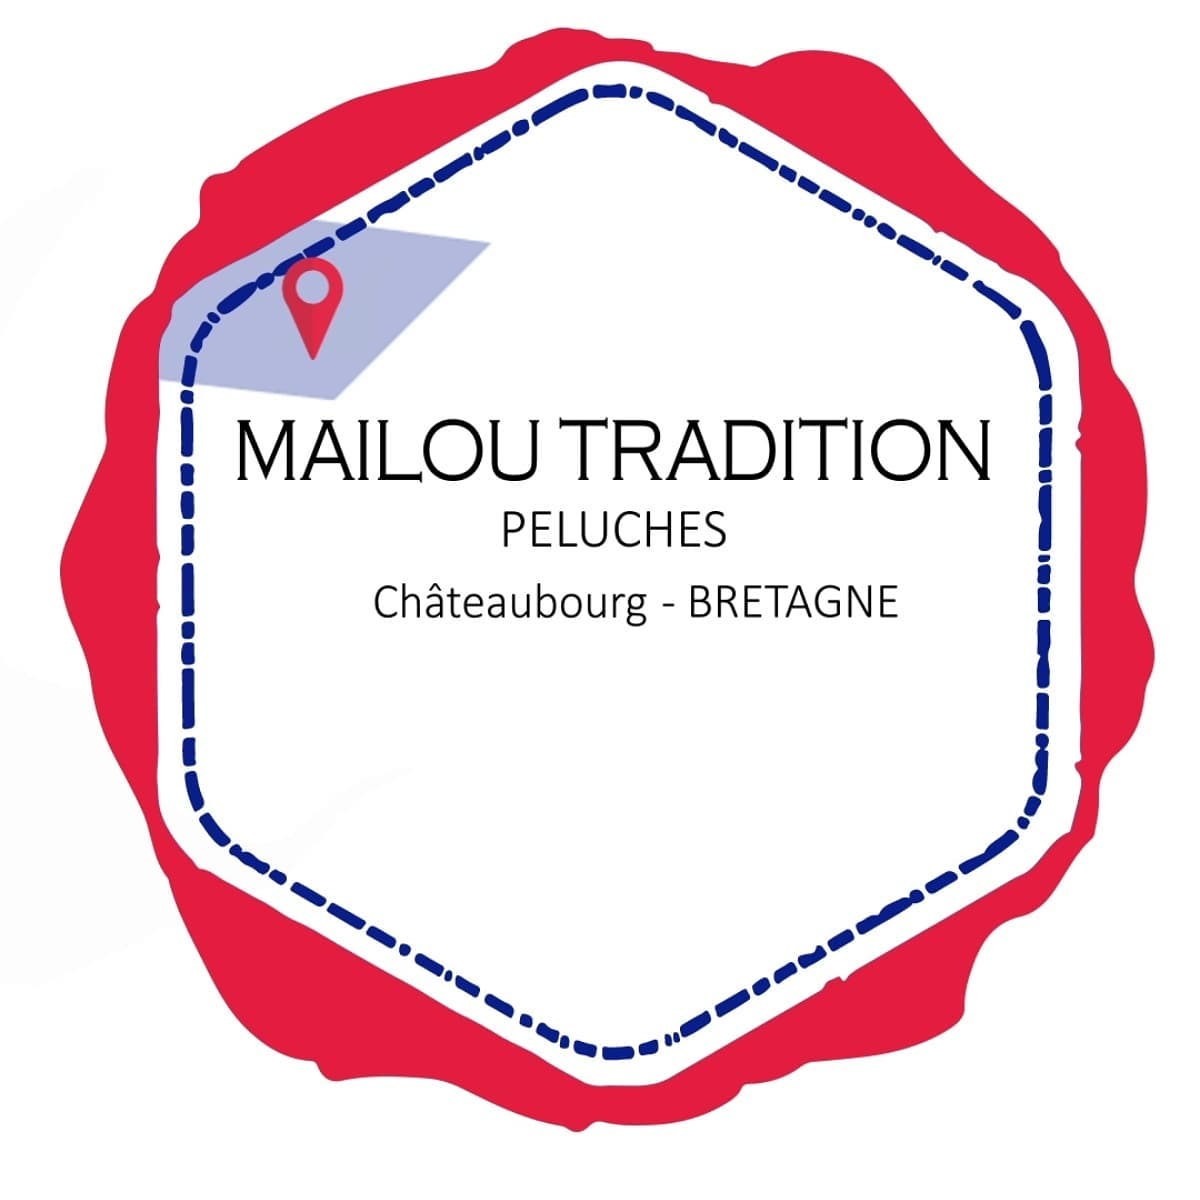 MAILOU TRADITION, doudous made in France